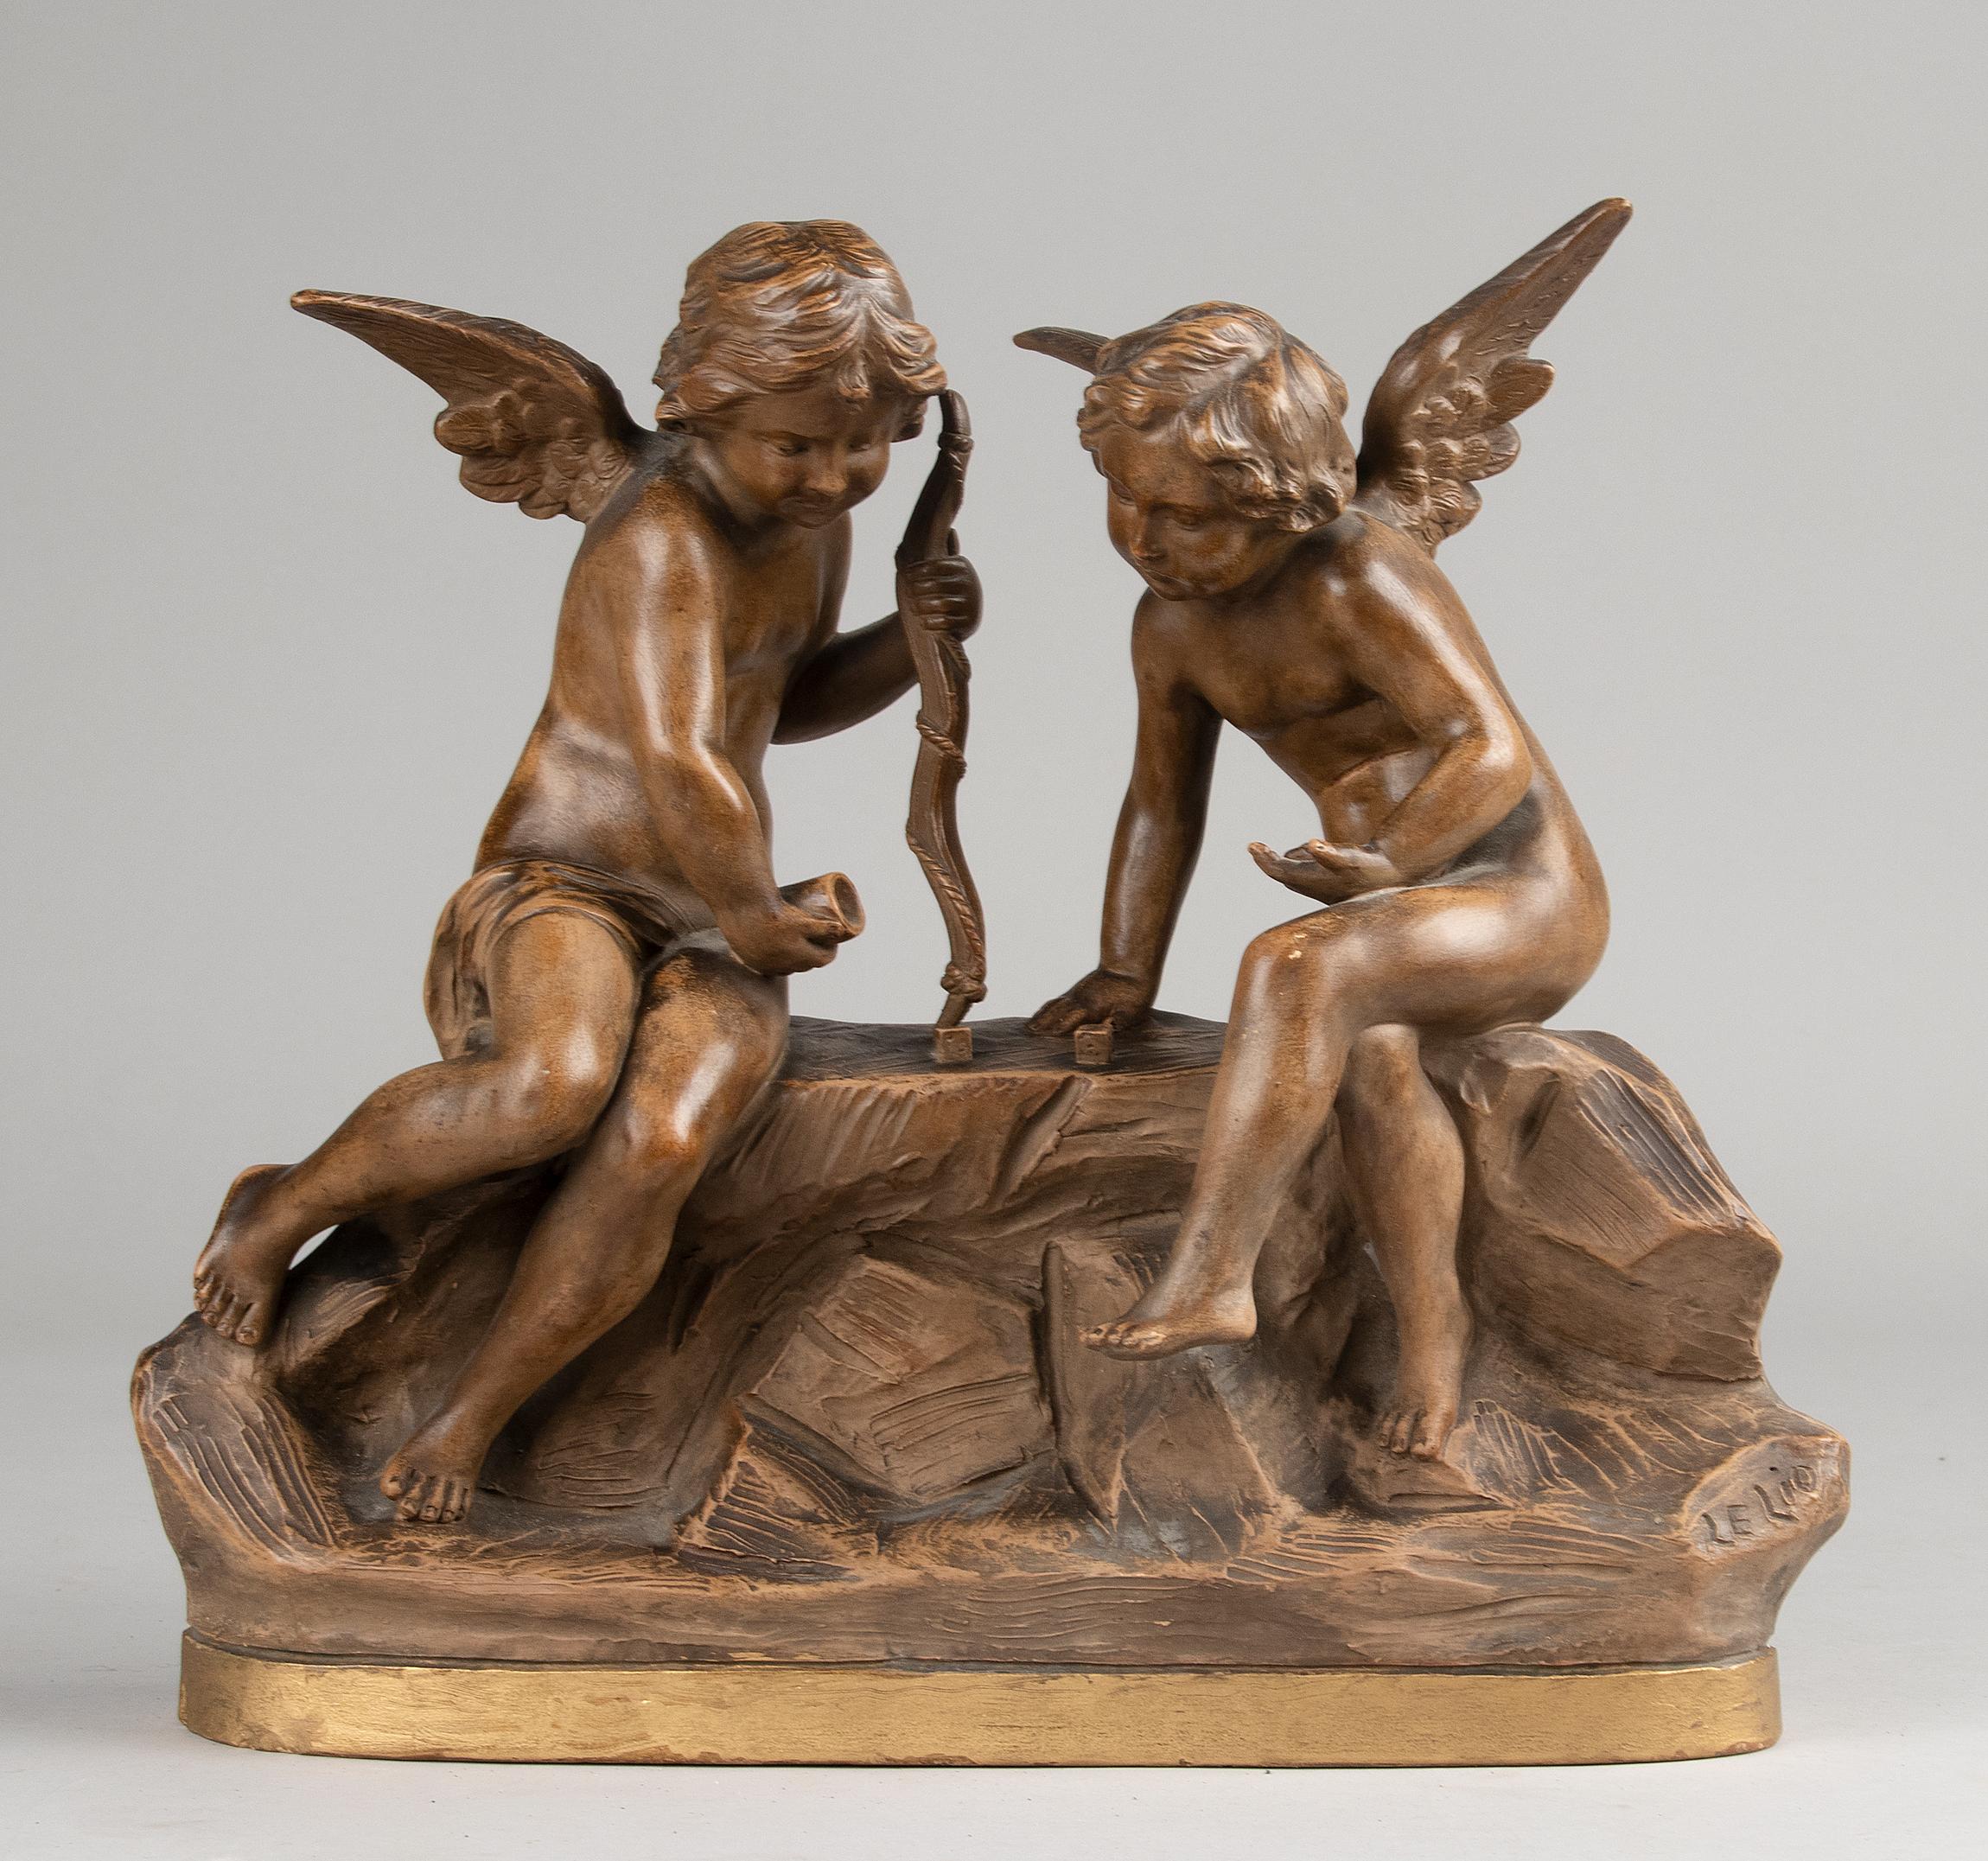 Beautiful antique statue, depicting two angels sitting on a rock, playing with dice. The statue is beautifully detailed and it is a lovely representation. This statue is made of terracotta with a bronze-brown patina.
Point of attention: there is a